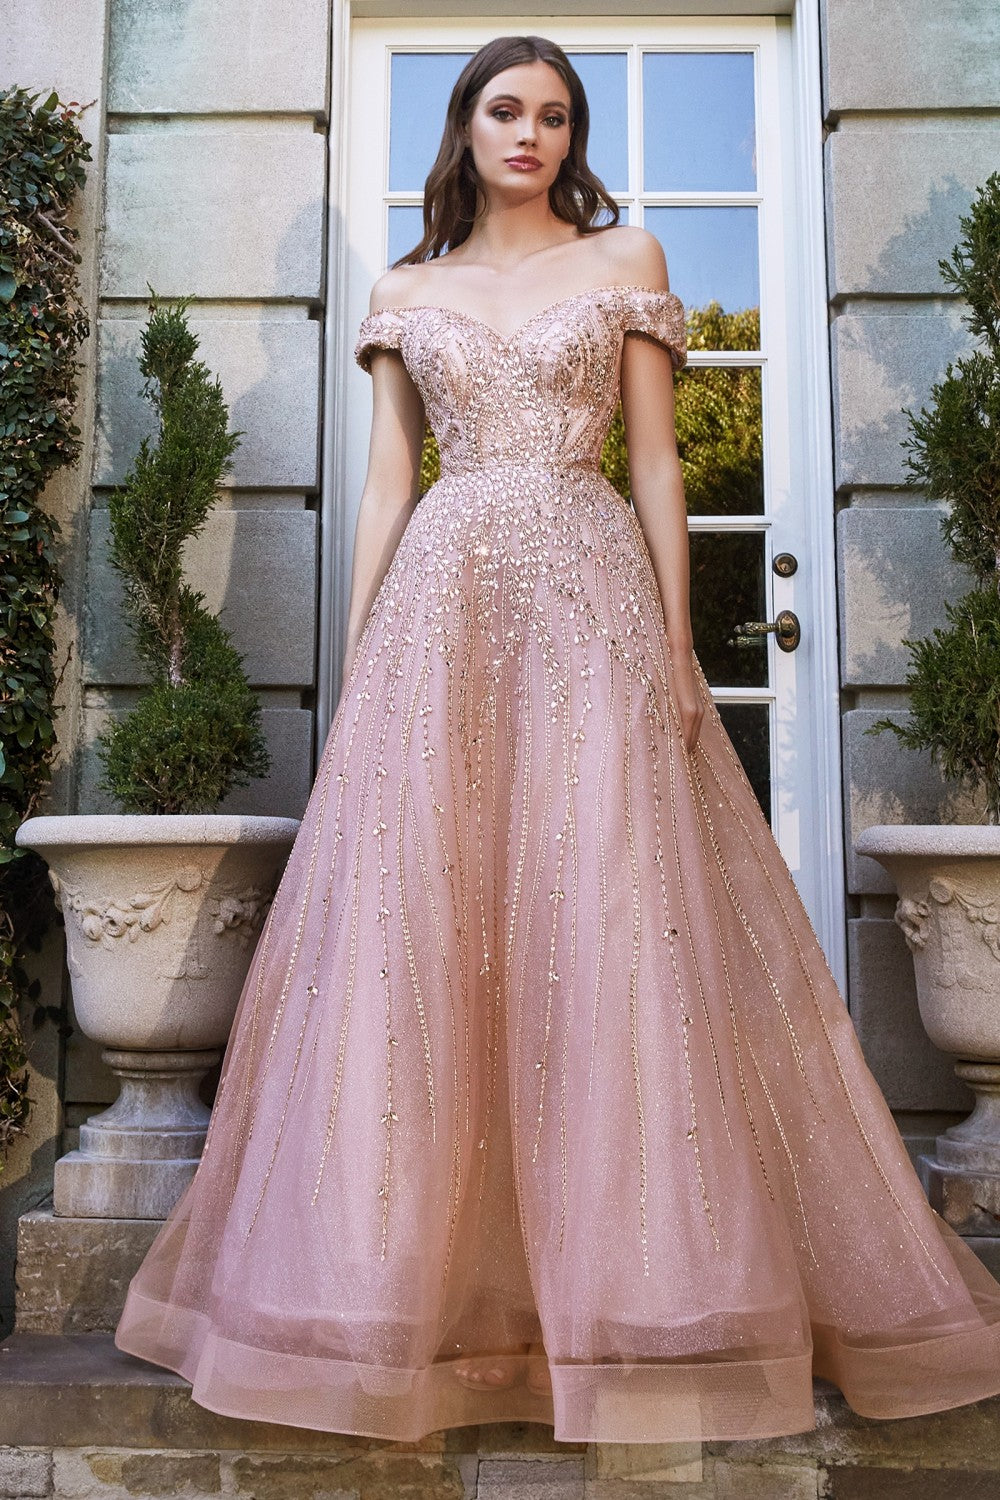 Fairy Tail gown | Ball gowns, Rose gold wedding dress, Ball gowns fantasy